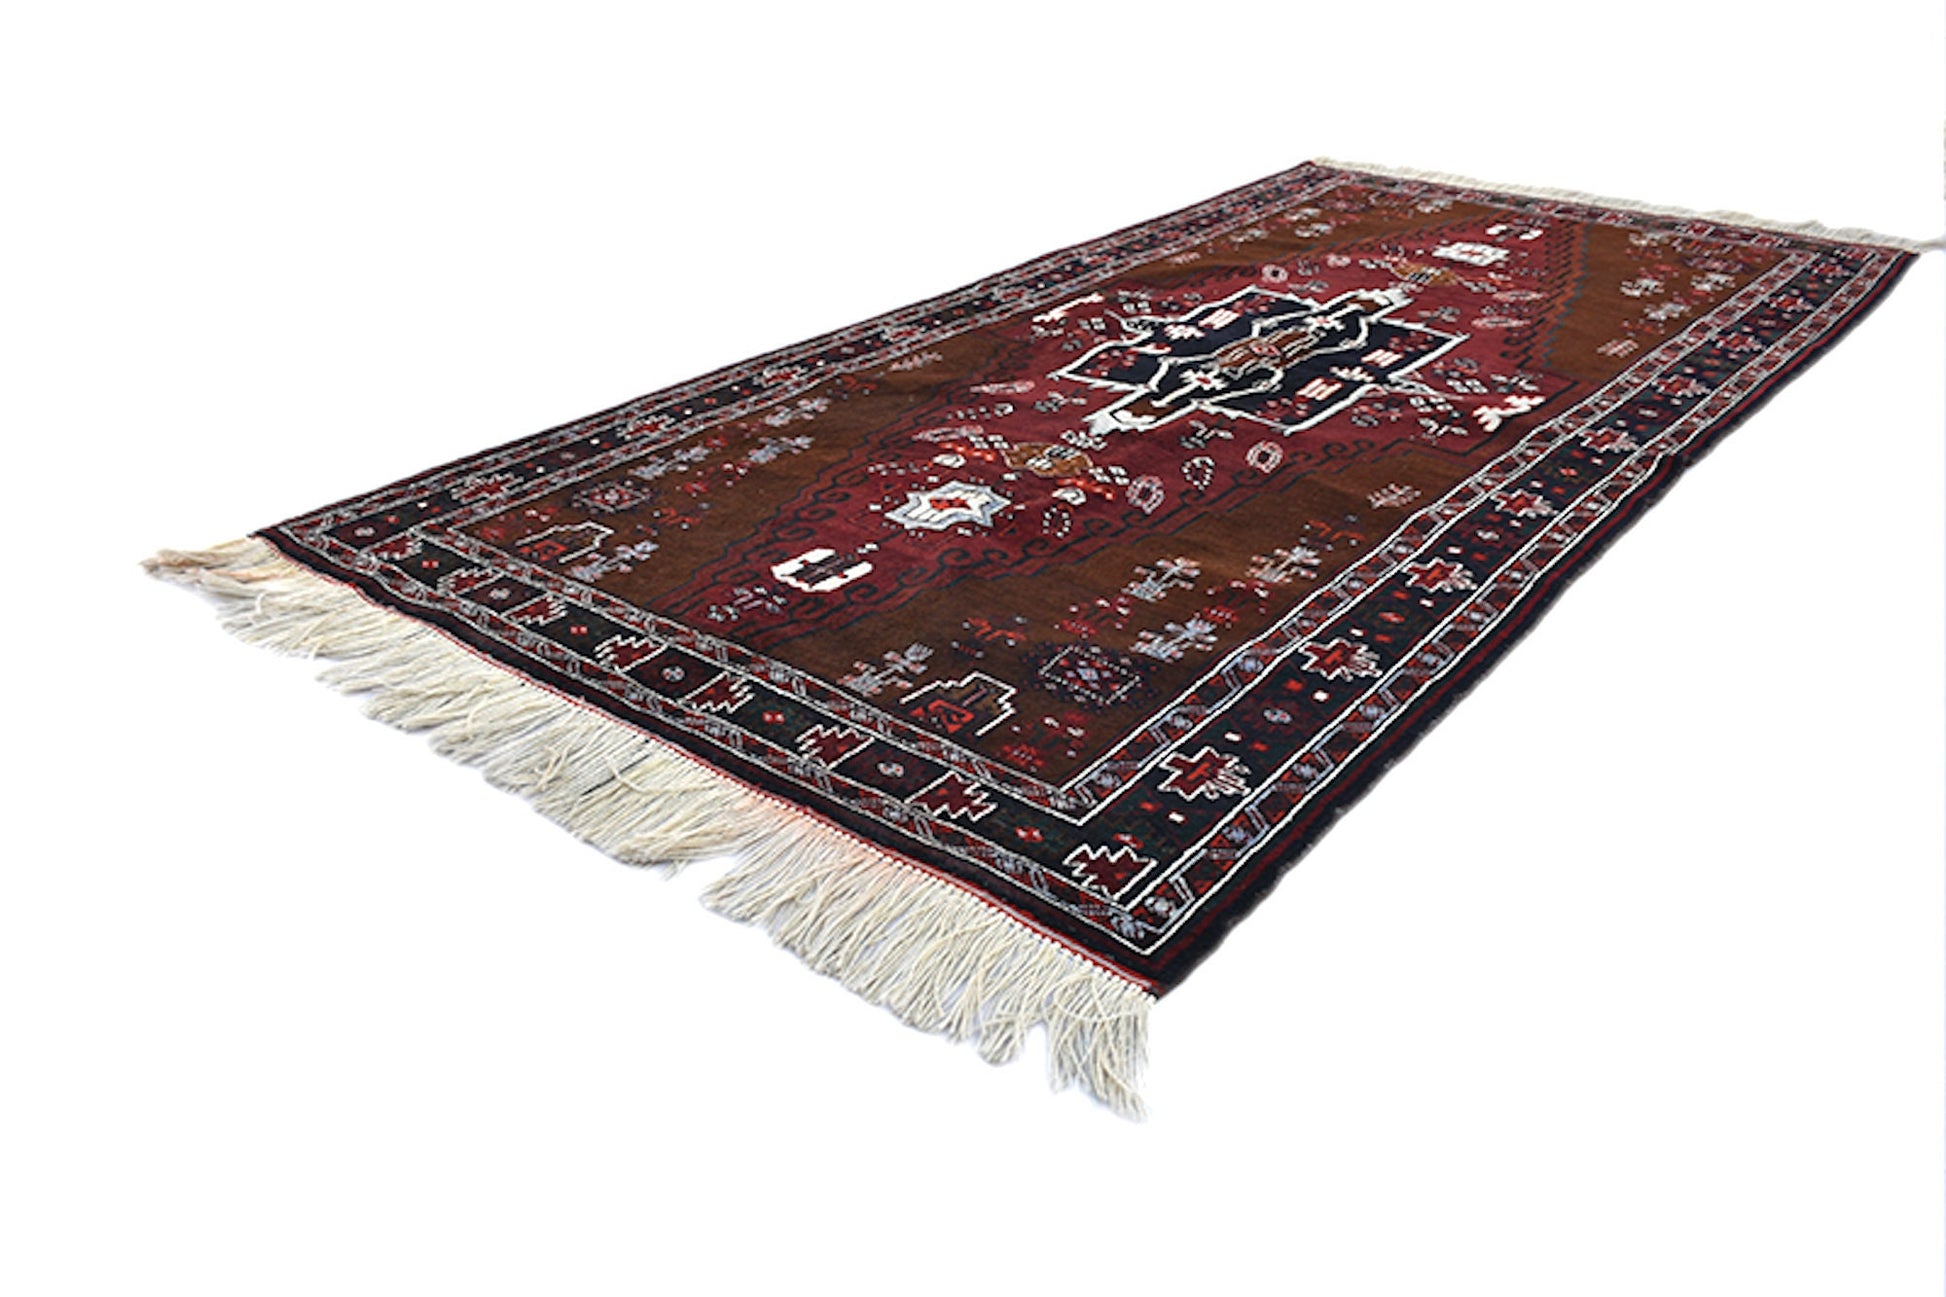 One of a kind Dark Antique Rug | 4 x 7 Turkish Caucasian Rug | Accent Hand Knotted Wool Rug | Medallion Geometric Pattern | Dark Red & Brown